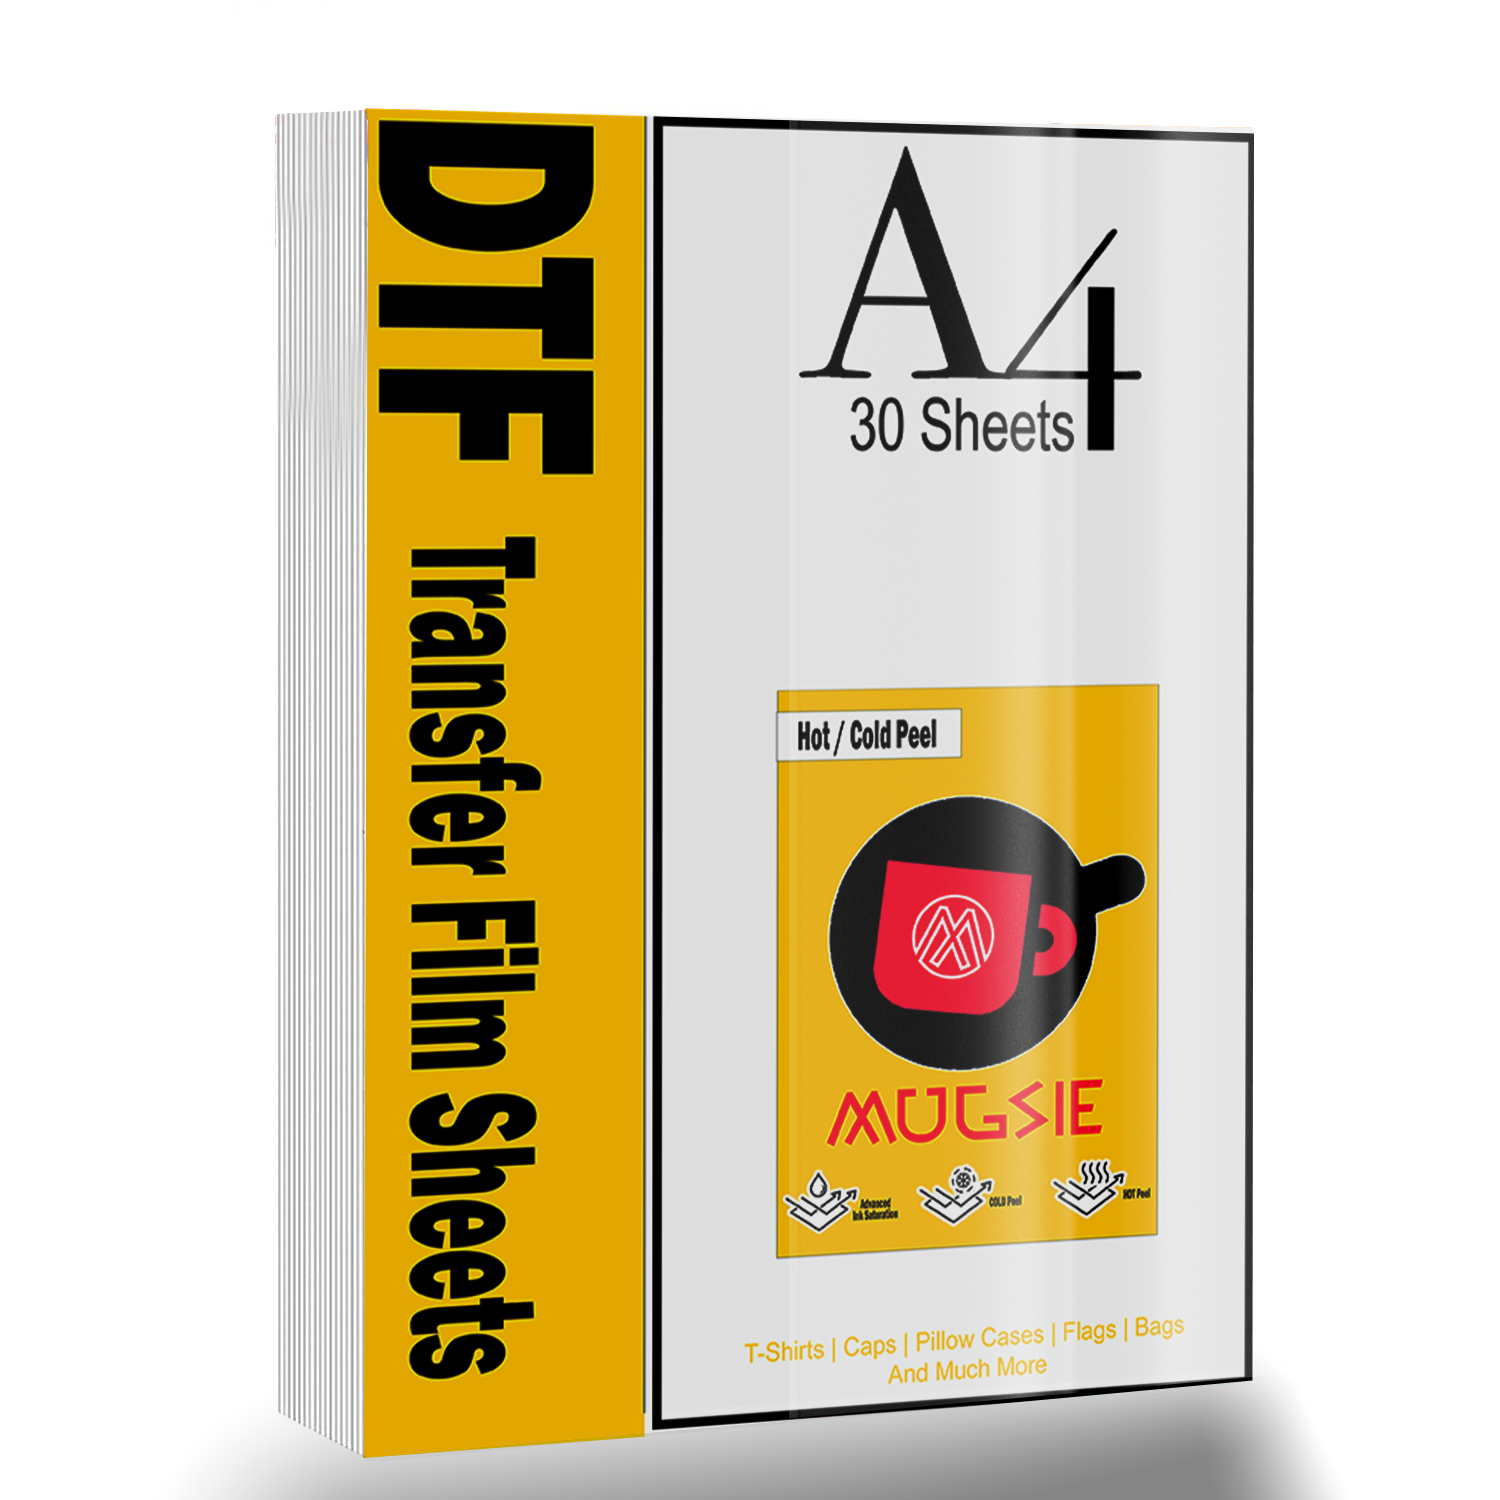 A4 (8.3×11.7) DTF Transfer Film - 30 Sheets with Double-Sided Matte  Finish. Compatible with Sublimation and DTF Inkjet Printers. Ideal for  Direct-to-Film Transfer onto T-shirts and Textiles.